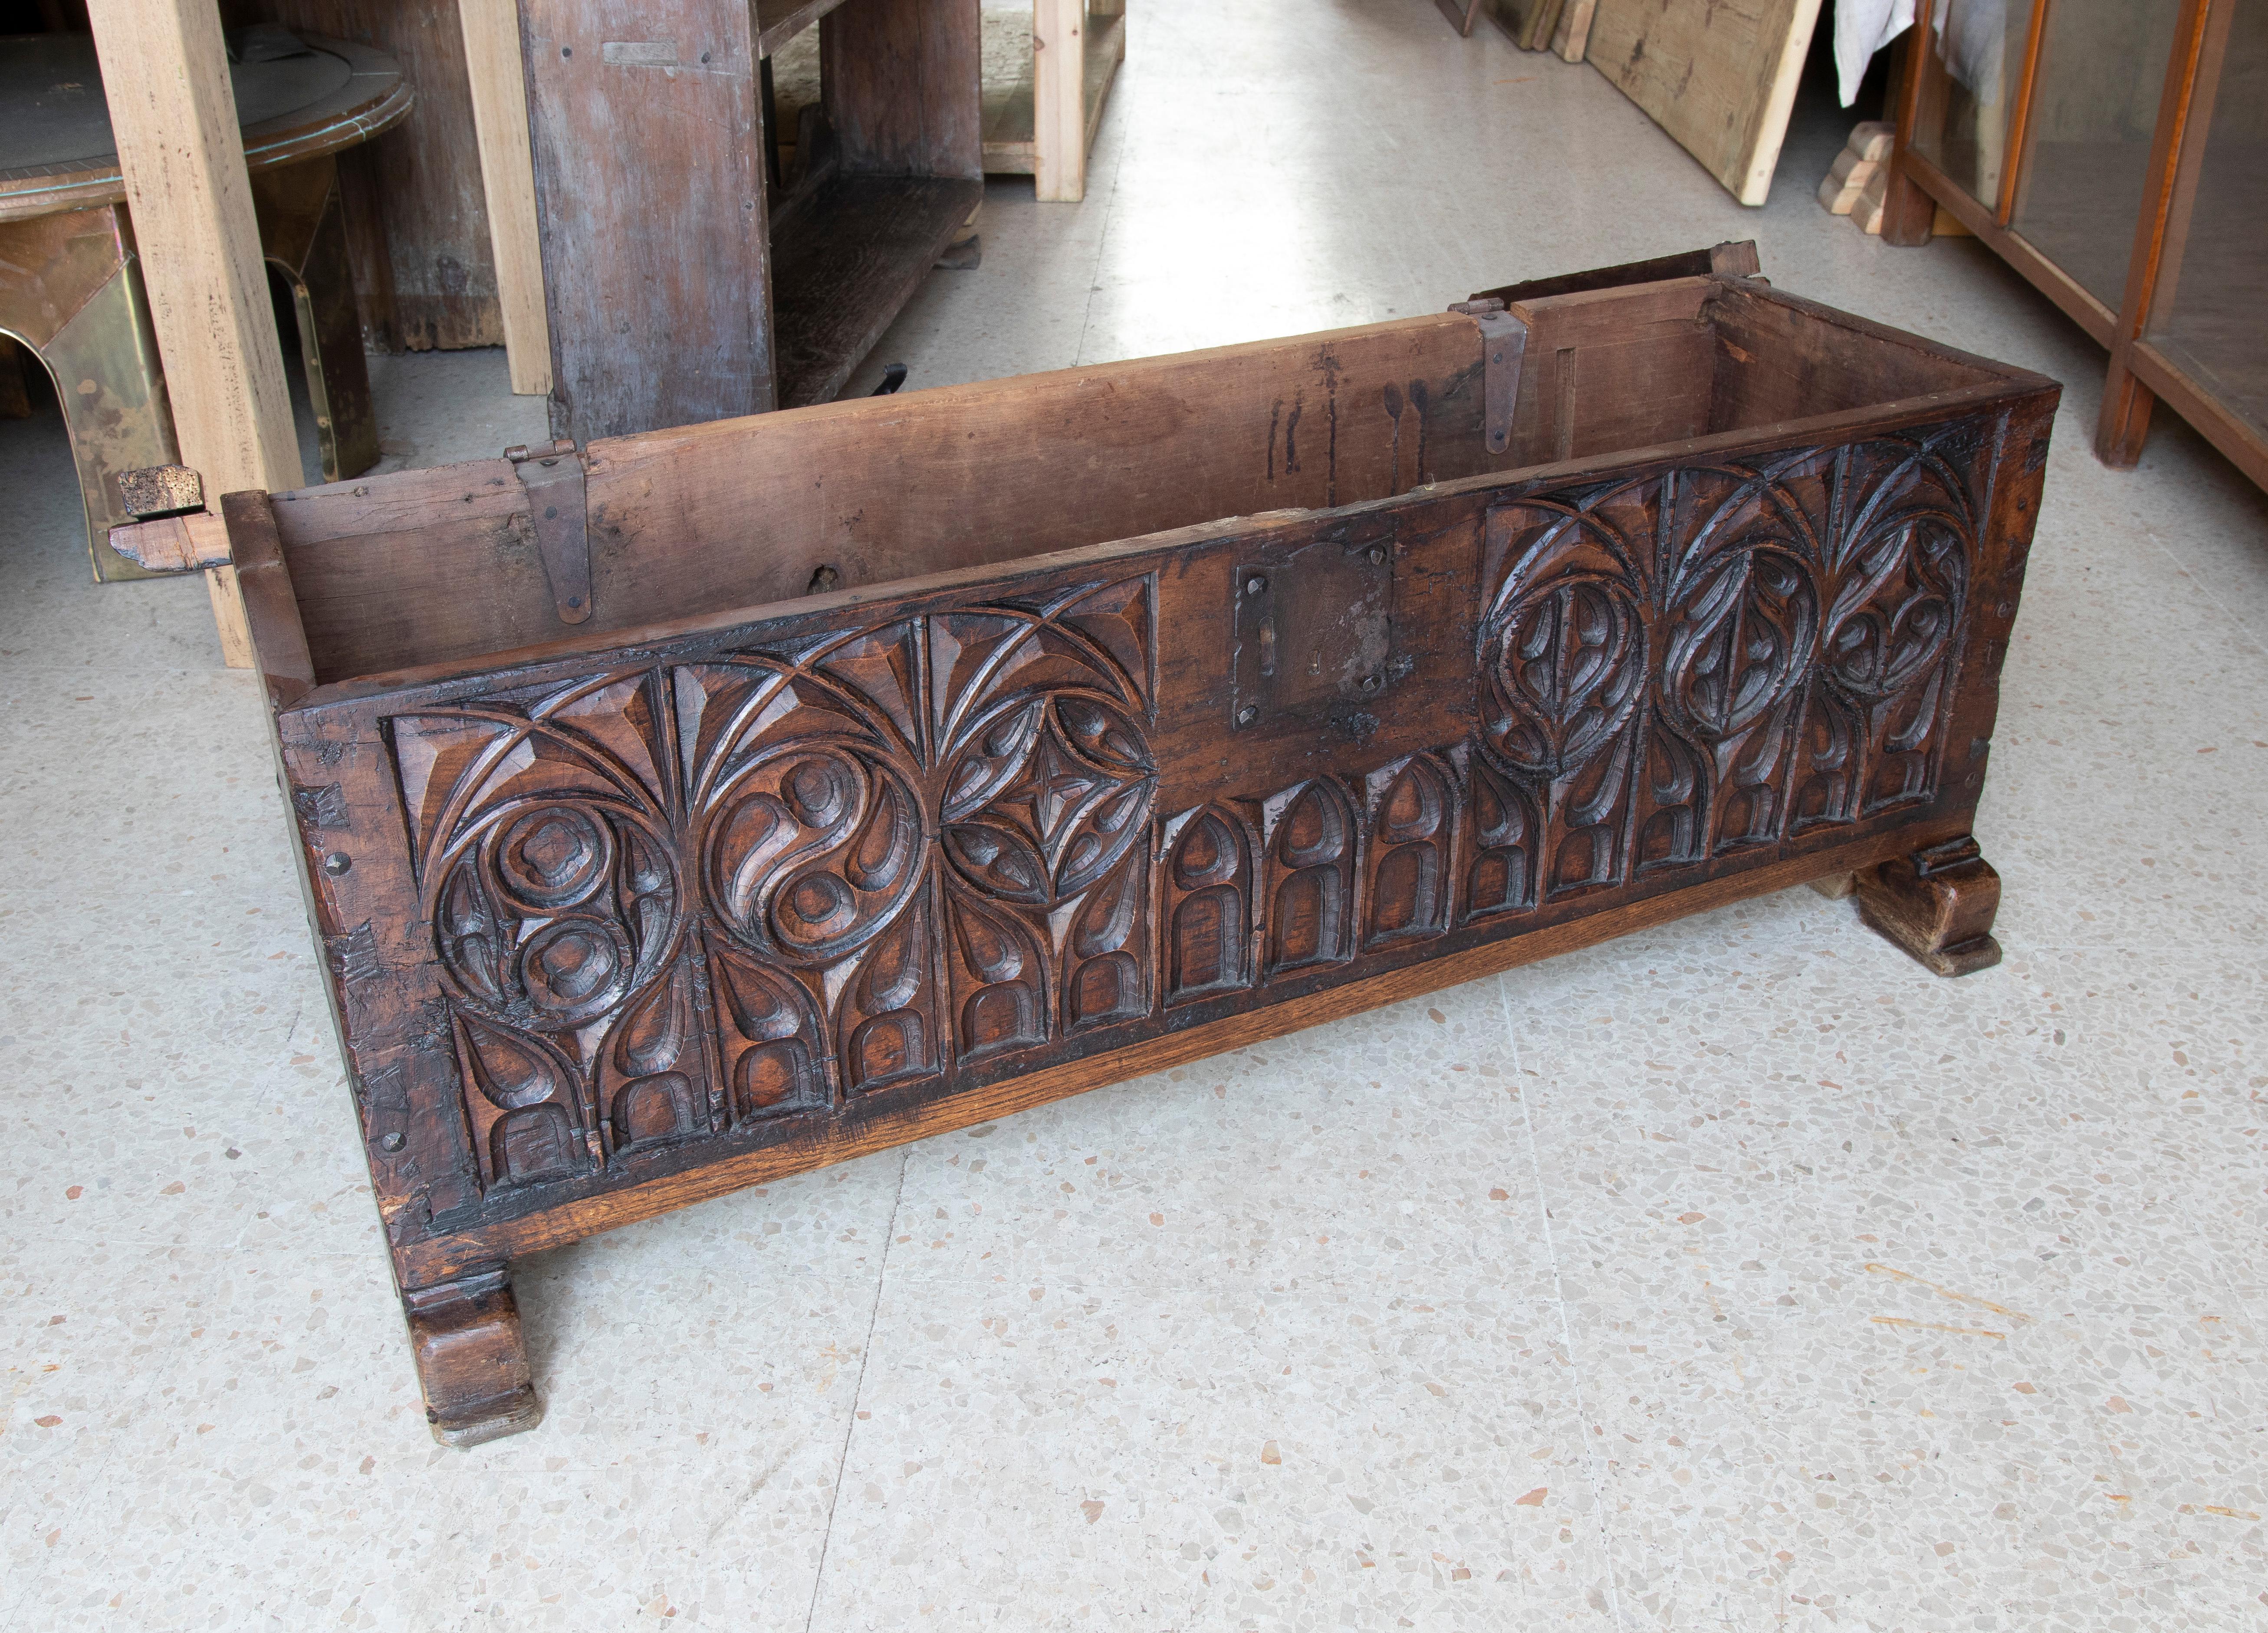 19th century Spanish hand carved wooden chest in Neogothic style.